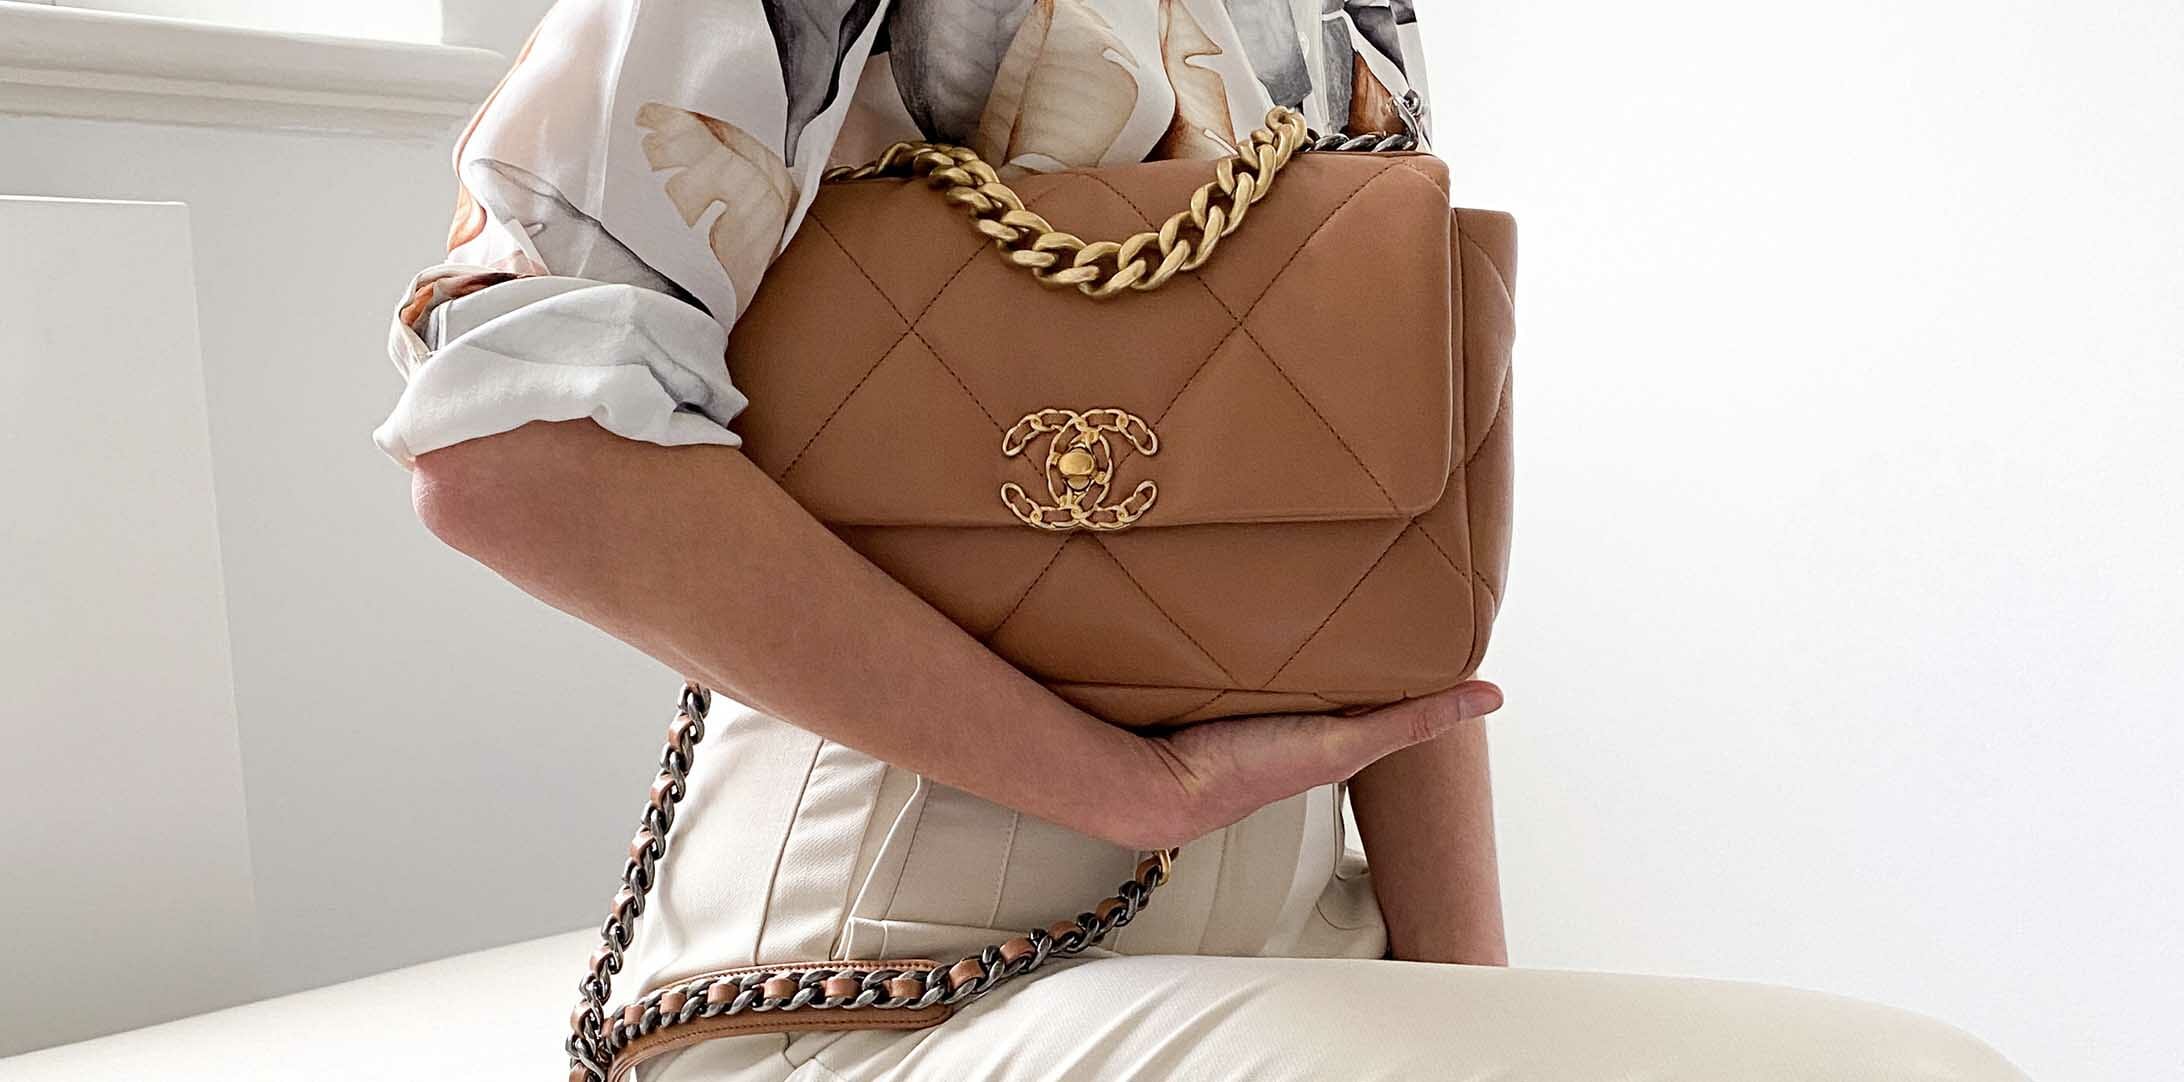 Chanel 19: Guide to the Hottest Bag of 2020 - PurseBop